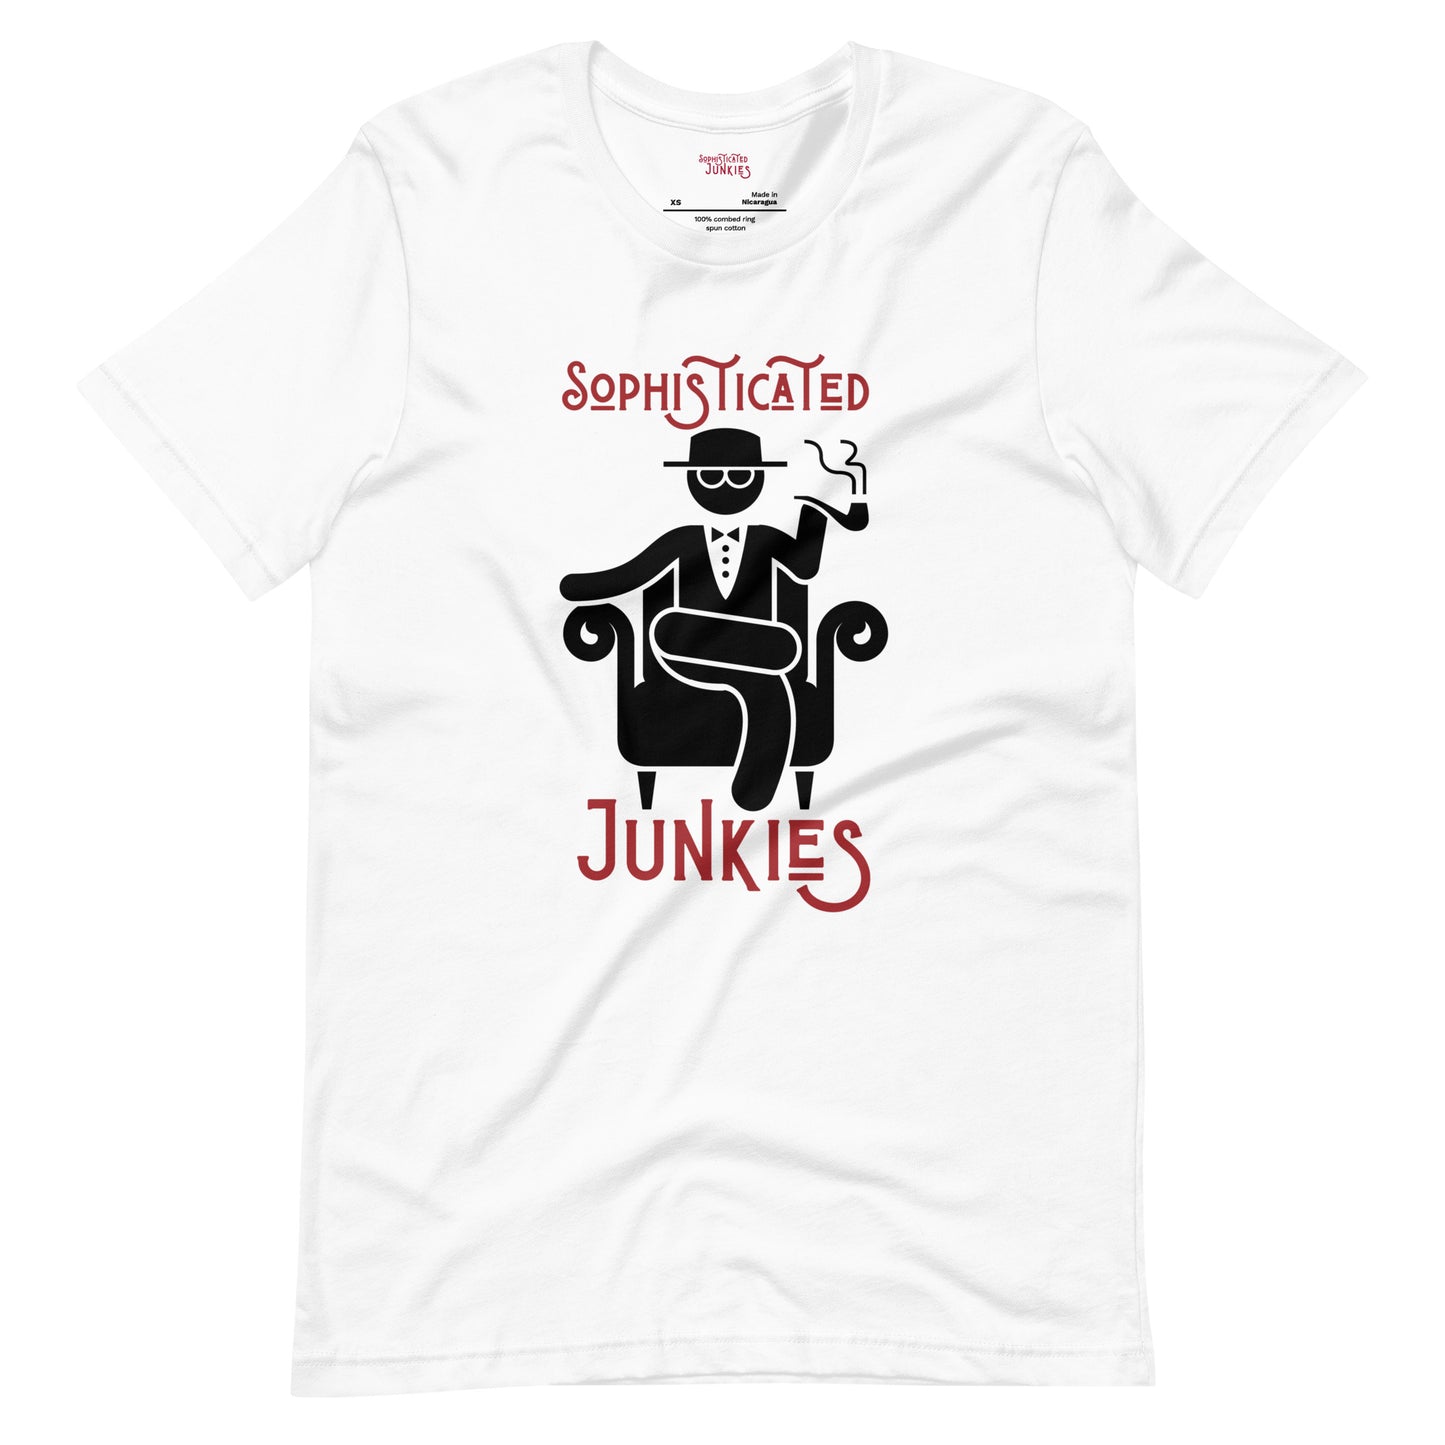 Sophisticated Junkies t-shirt